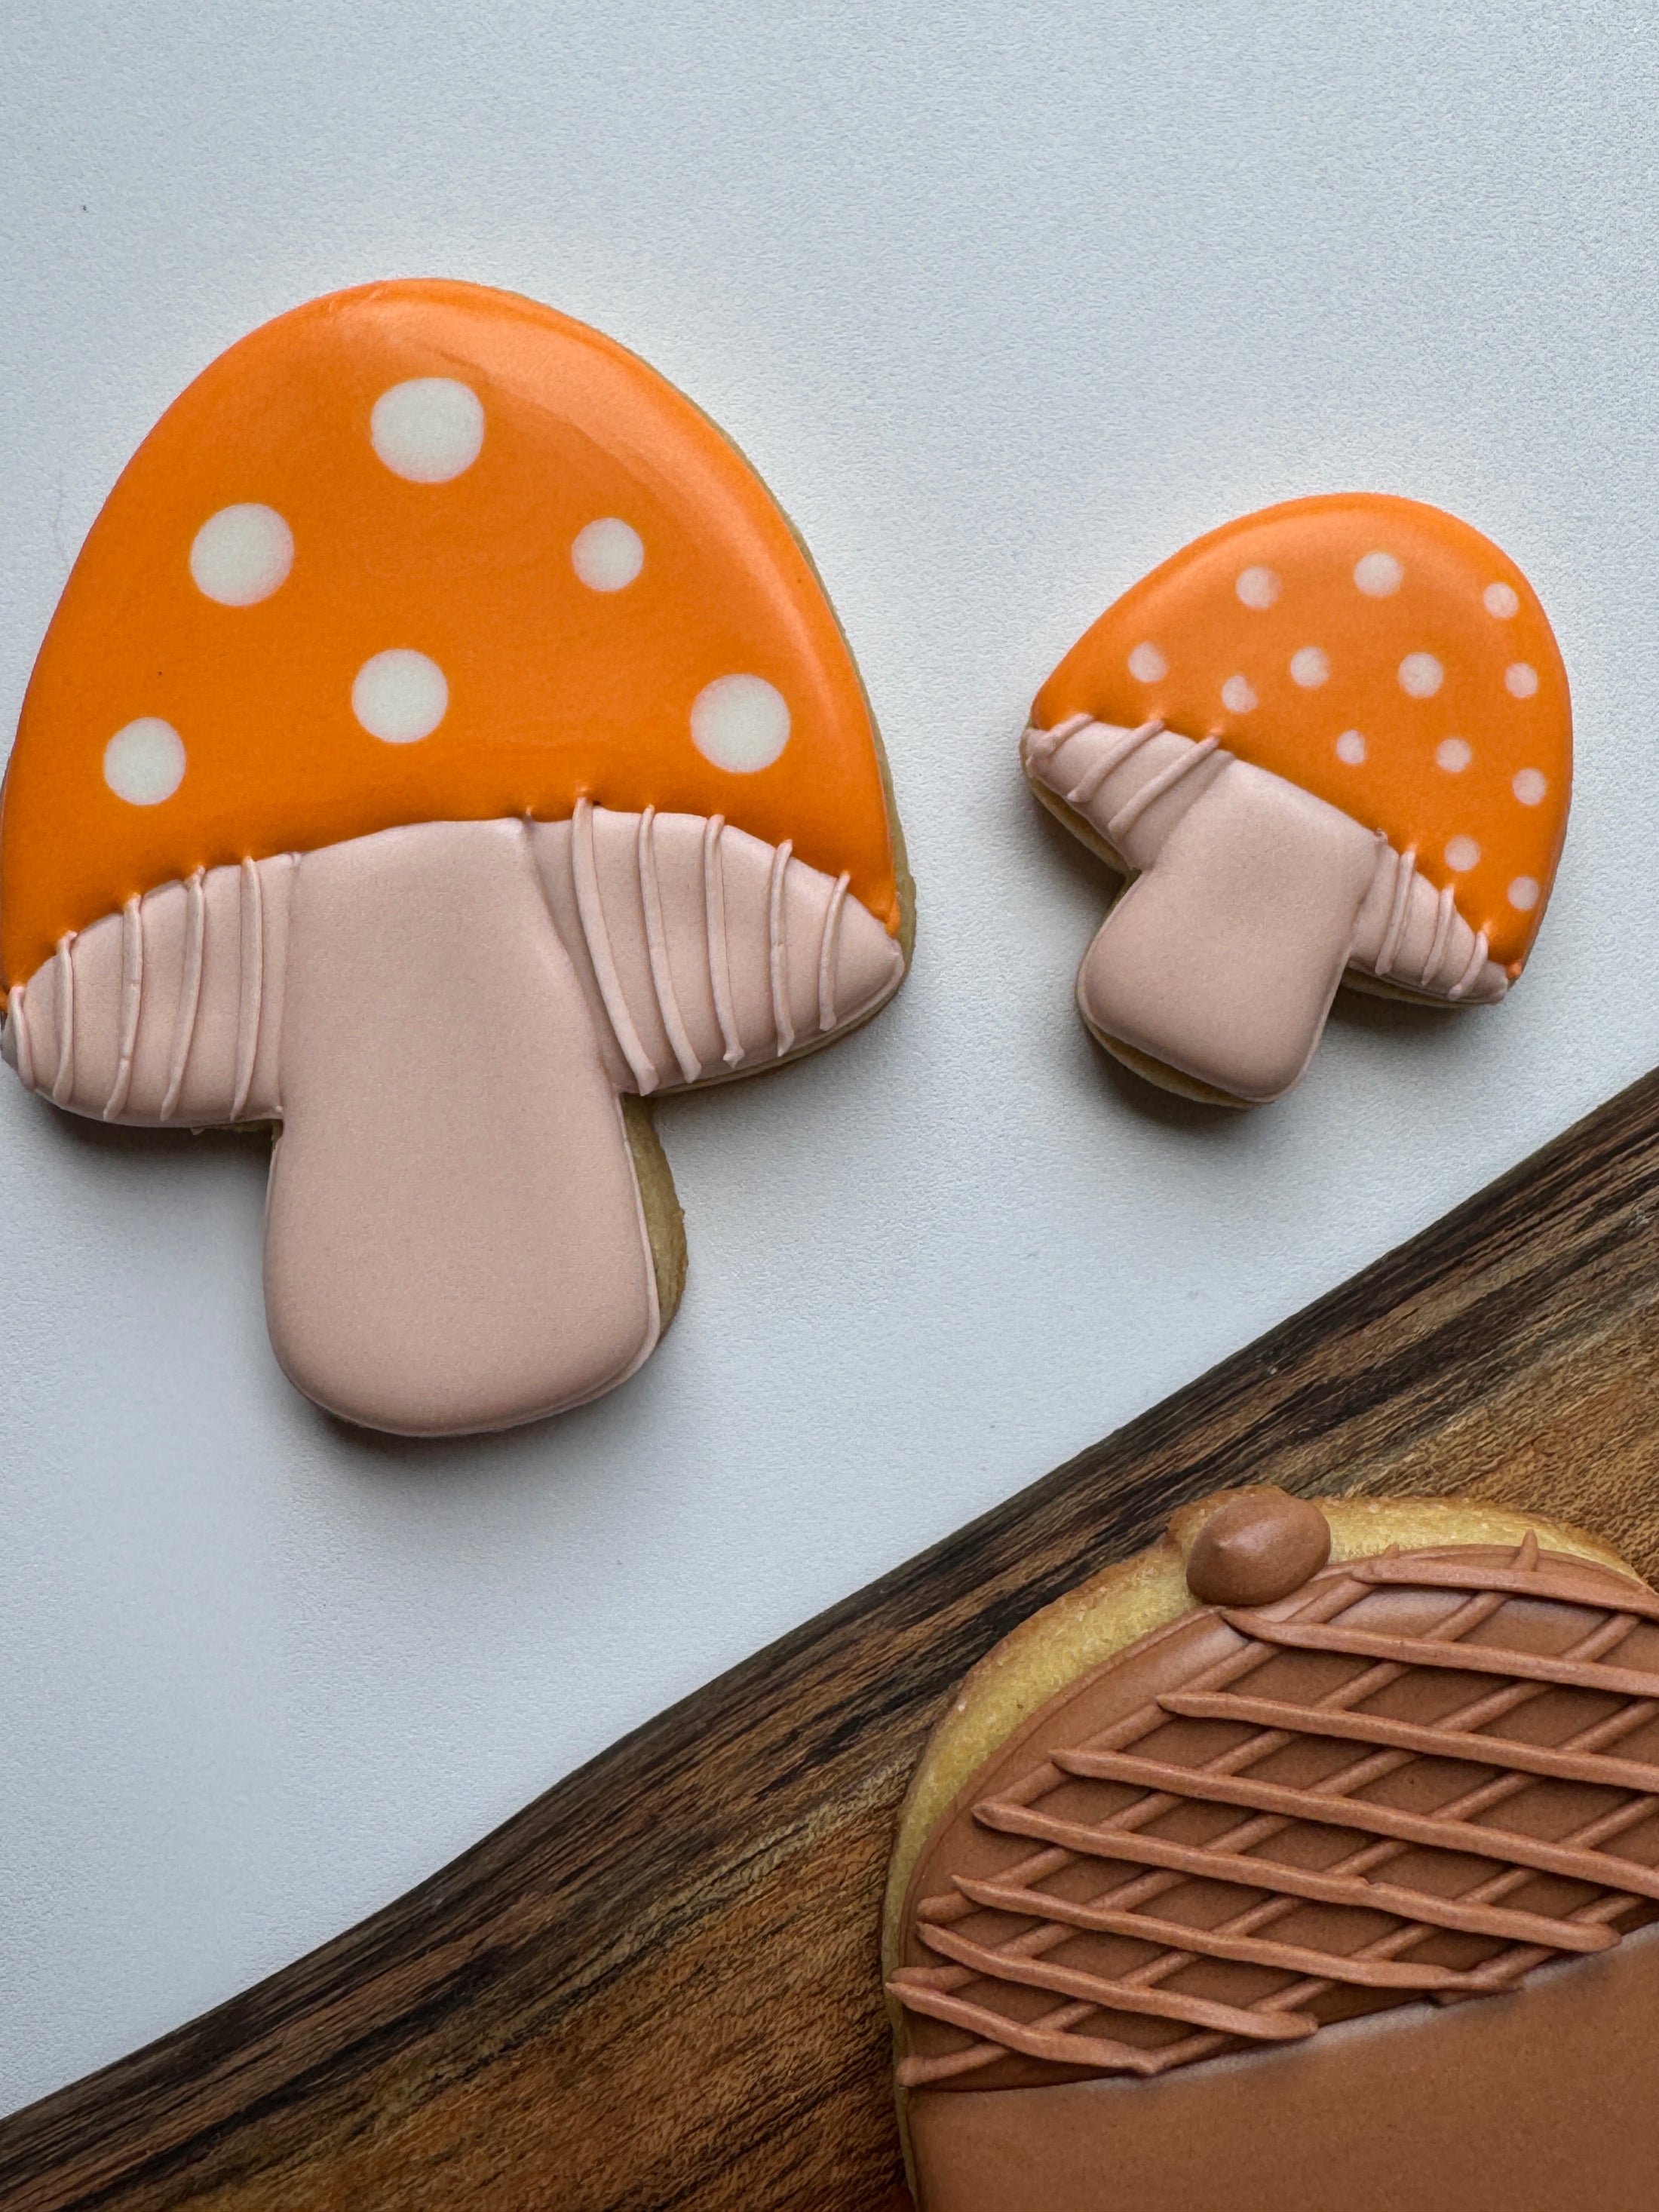 mushroom cookie Online Cookie Decorating Classes- The Cheerful Box